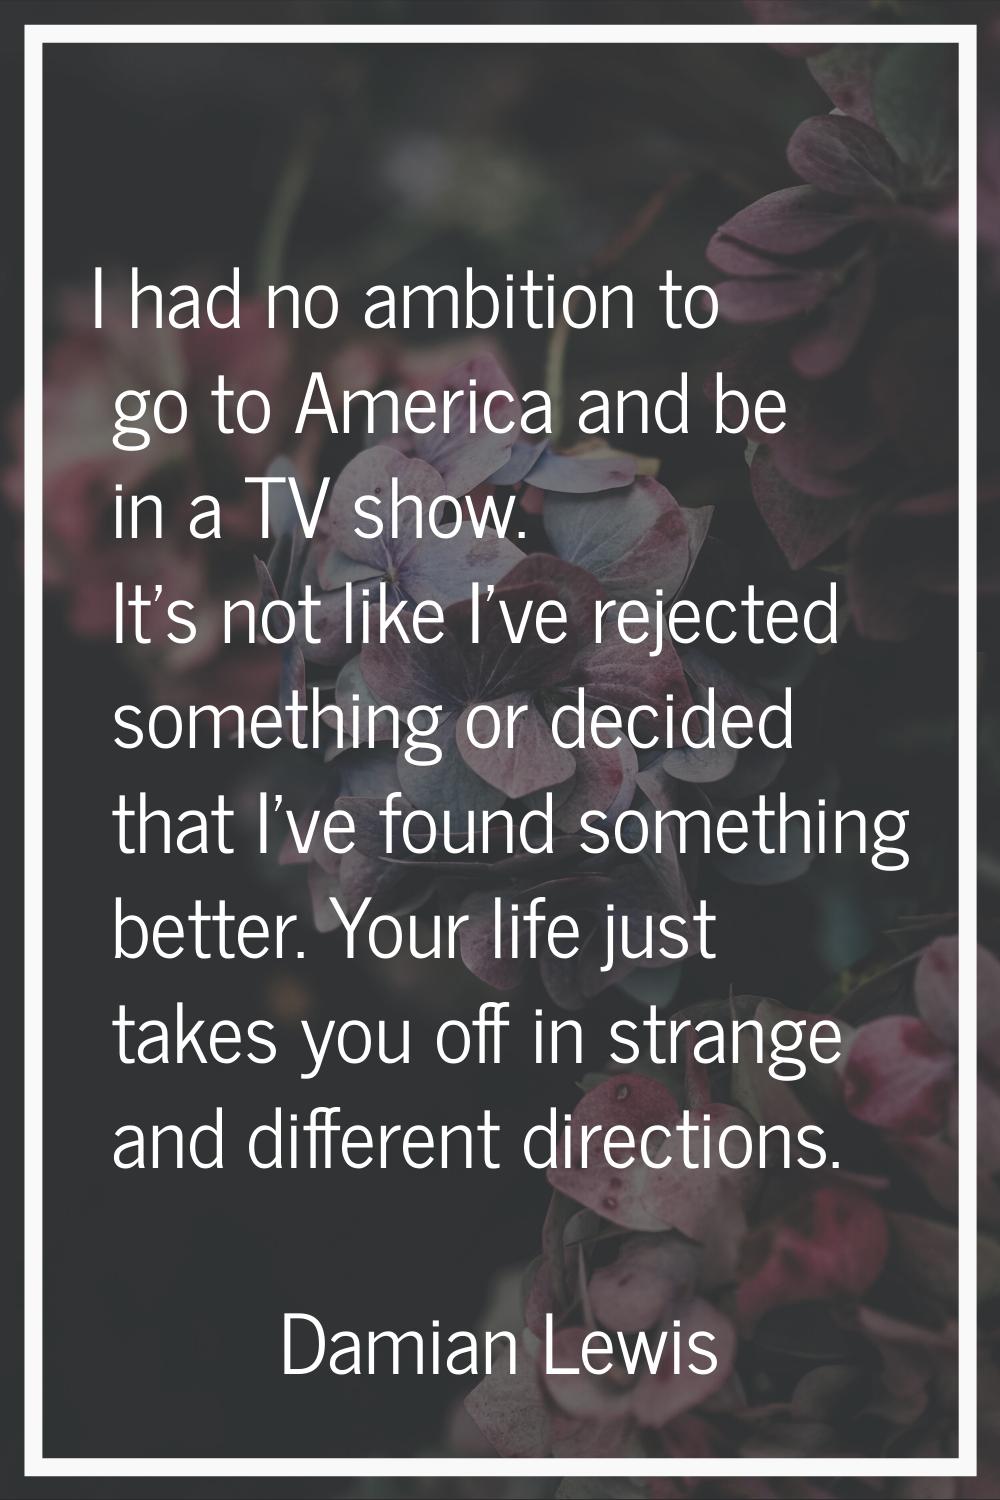 I had no ambition to go to America and be in a TV show. It's not like I've rejected something or de